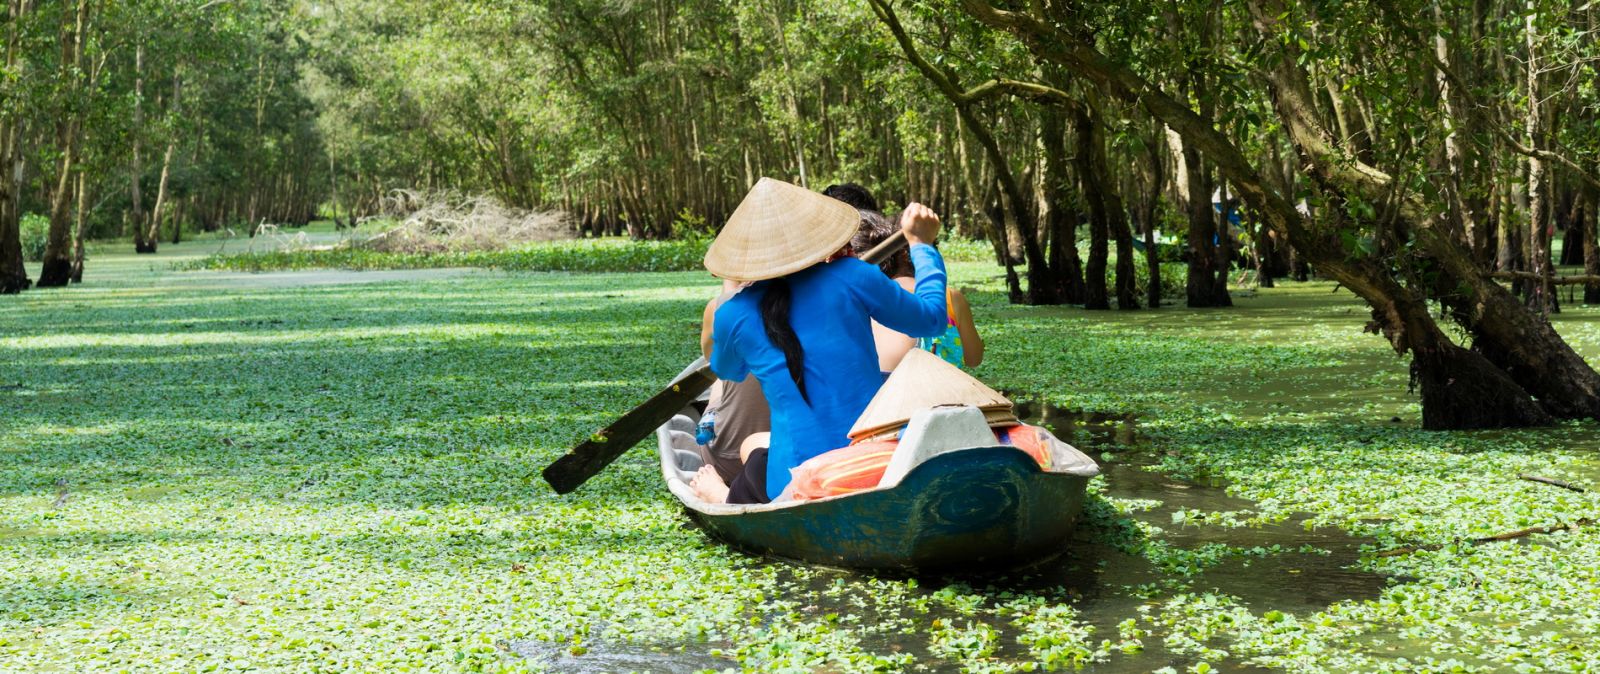 DISCOVER MEKONG DELTA IN FLOATING WATER SEASON